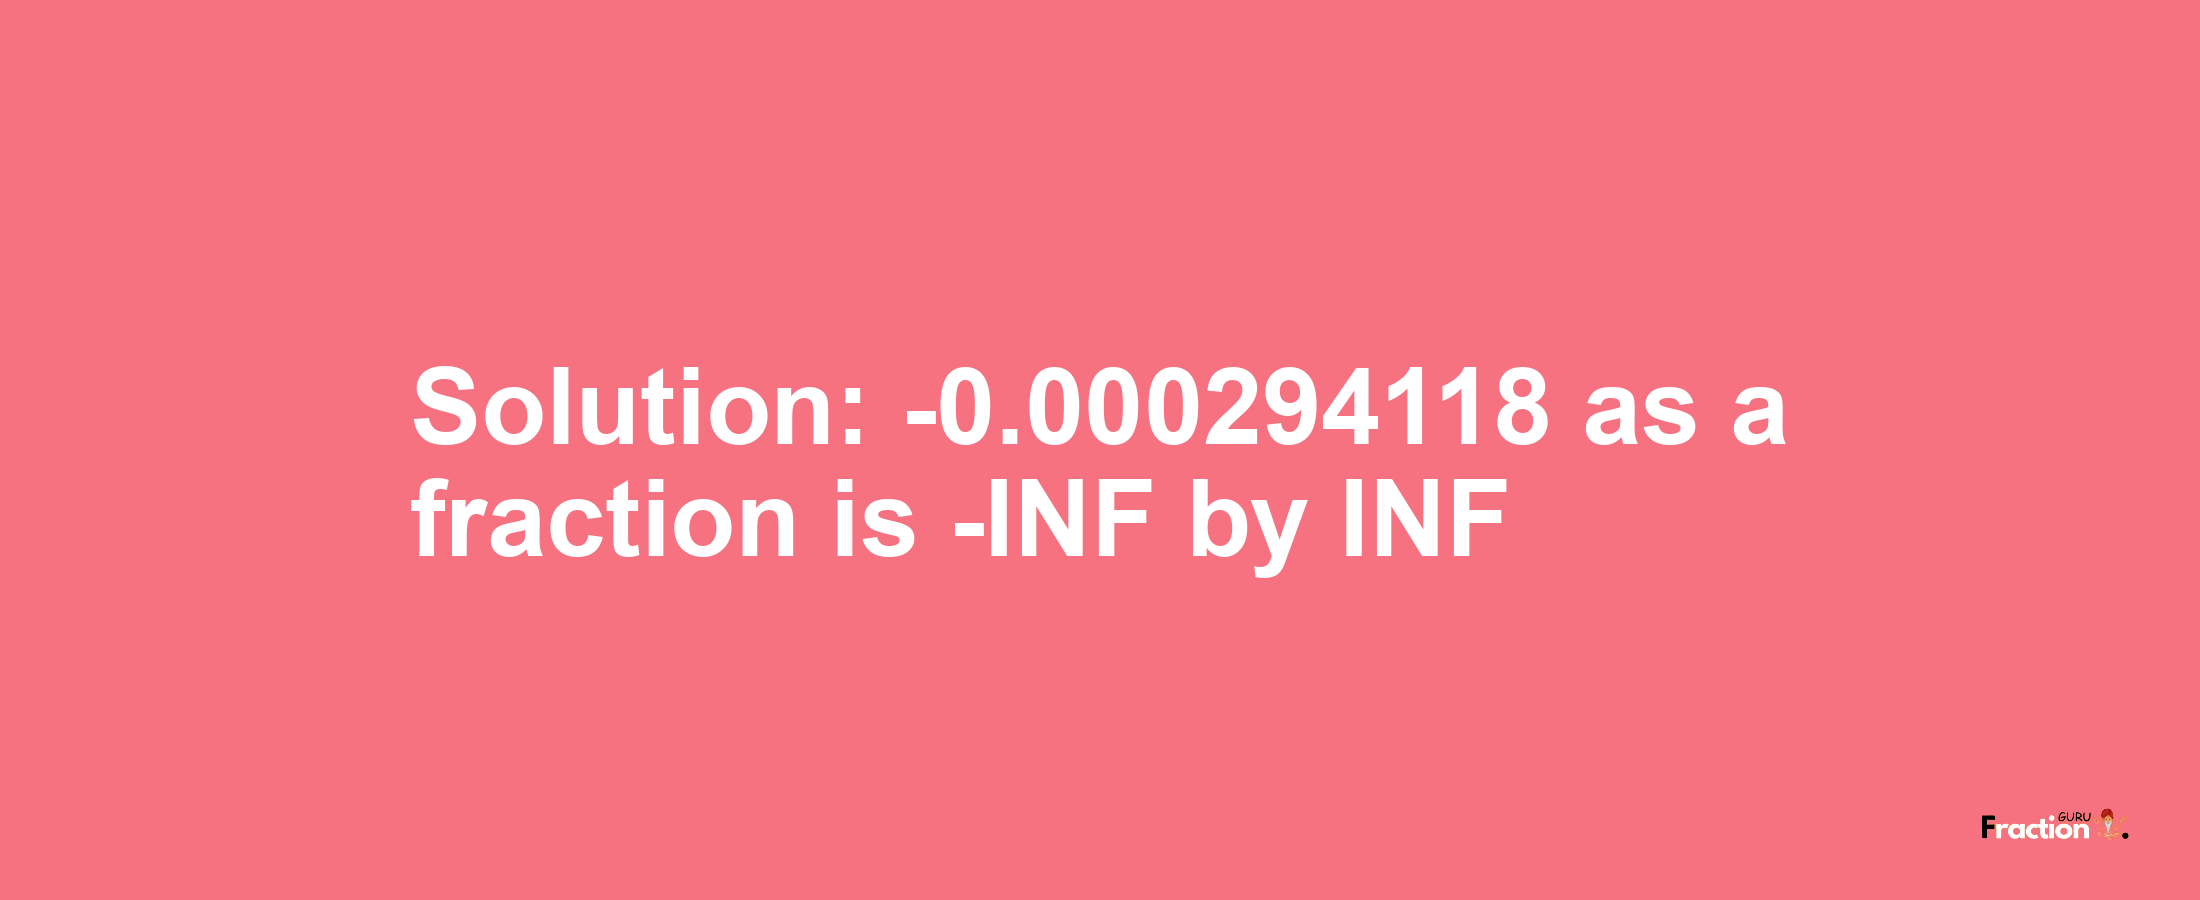 Solution:-0.000294118 as a fraction is -INF/INF